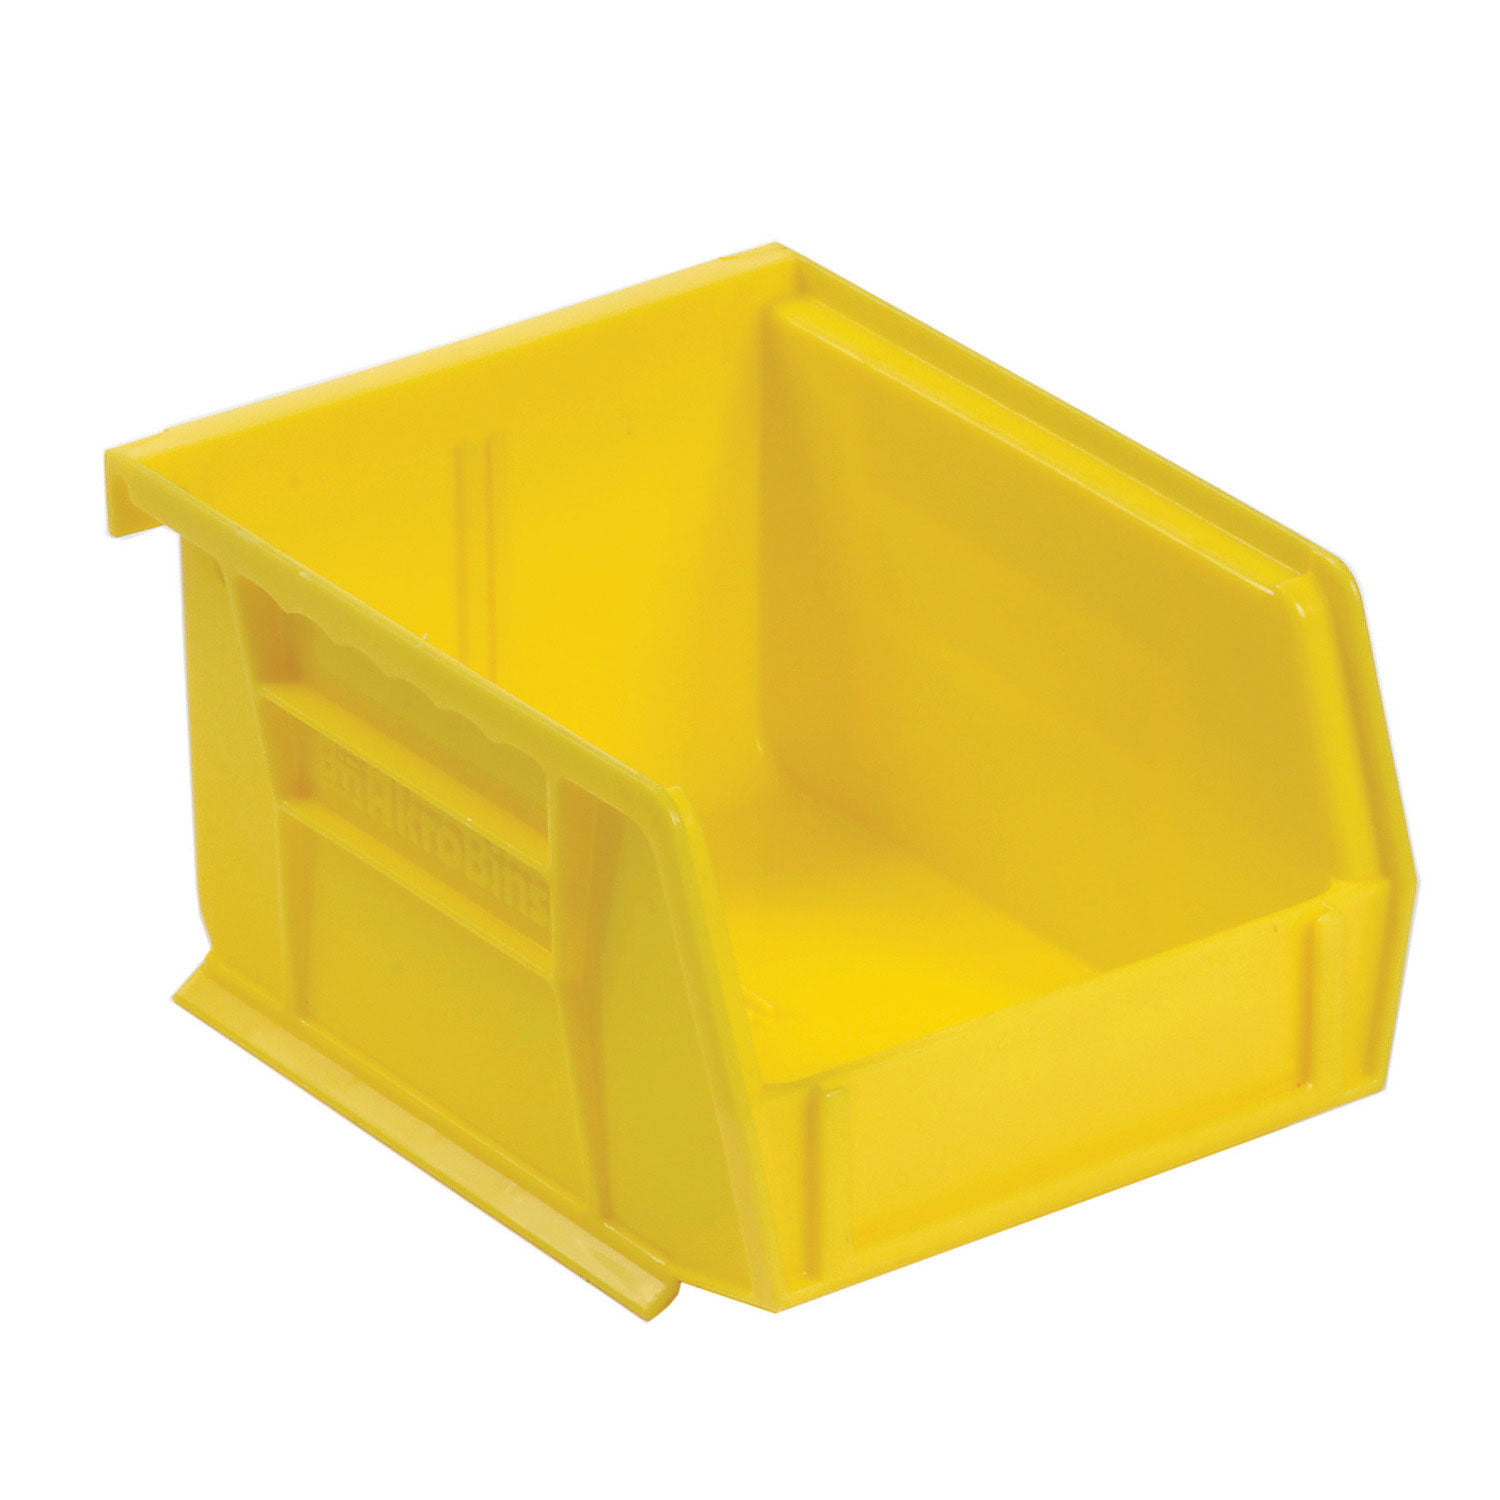 AKRO-MILS 39120SCLAR Stacking Container,12-1/2" H x 21-1/2" L 